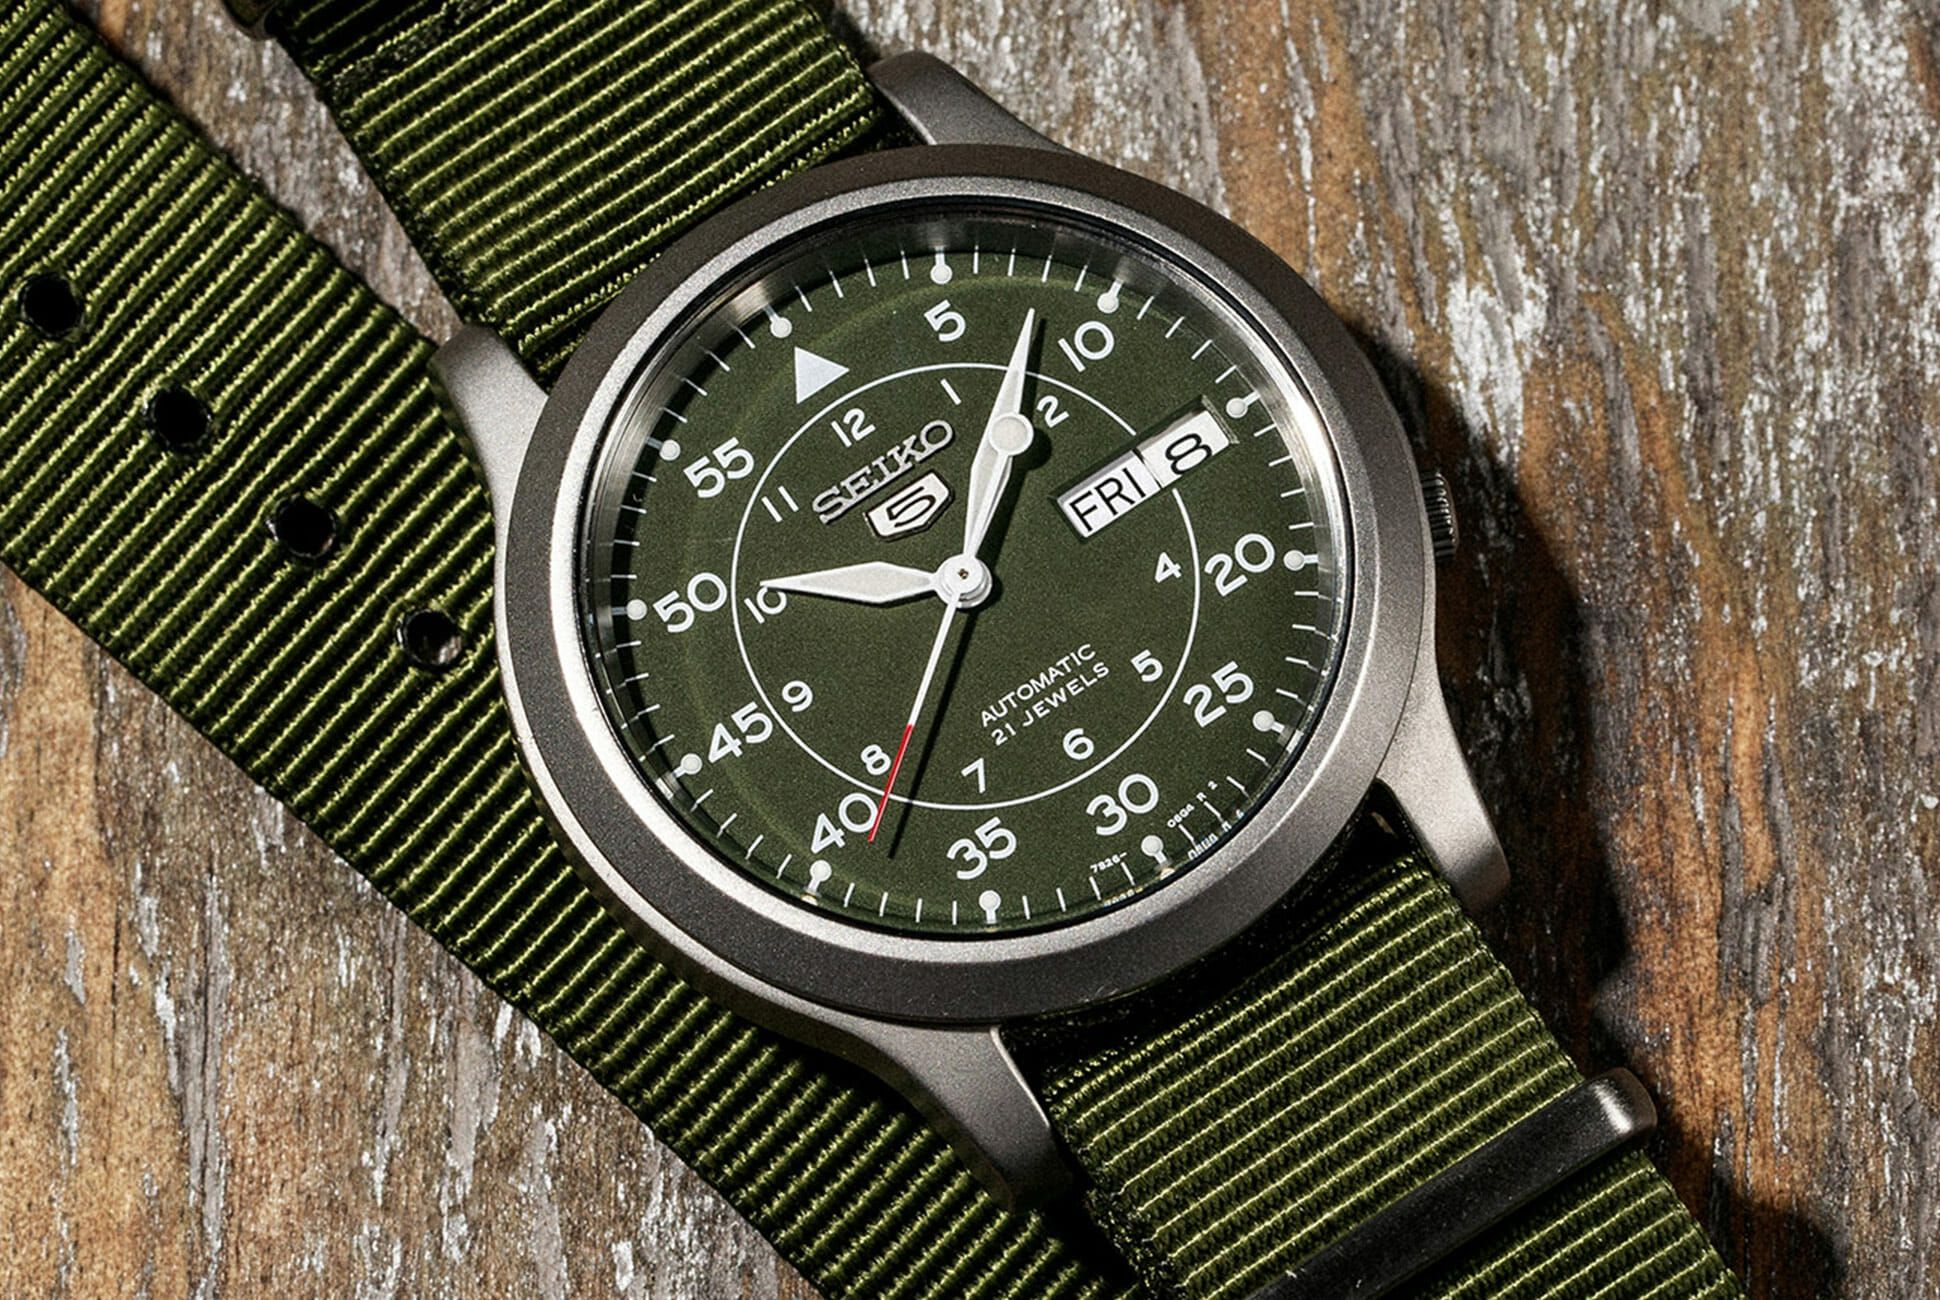 Own a Seiko 5 Field Watch? Here Are 3 